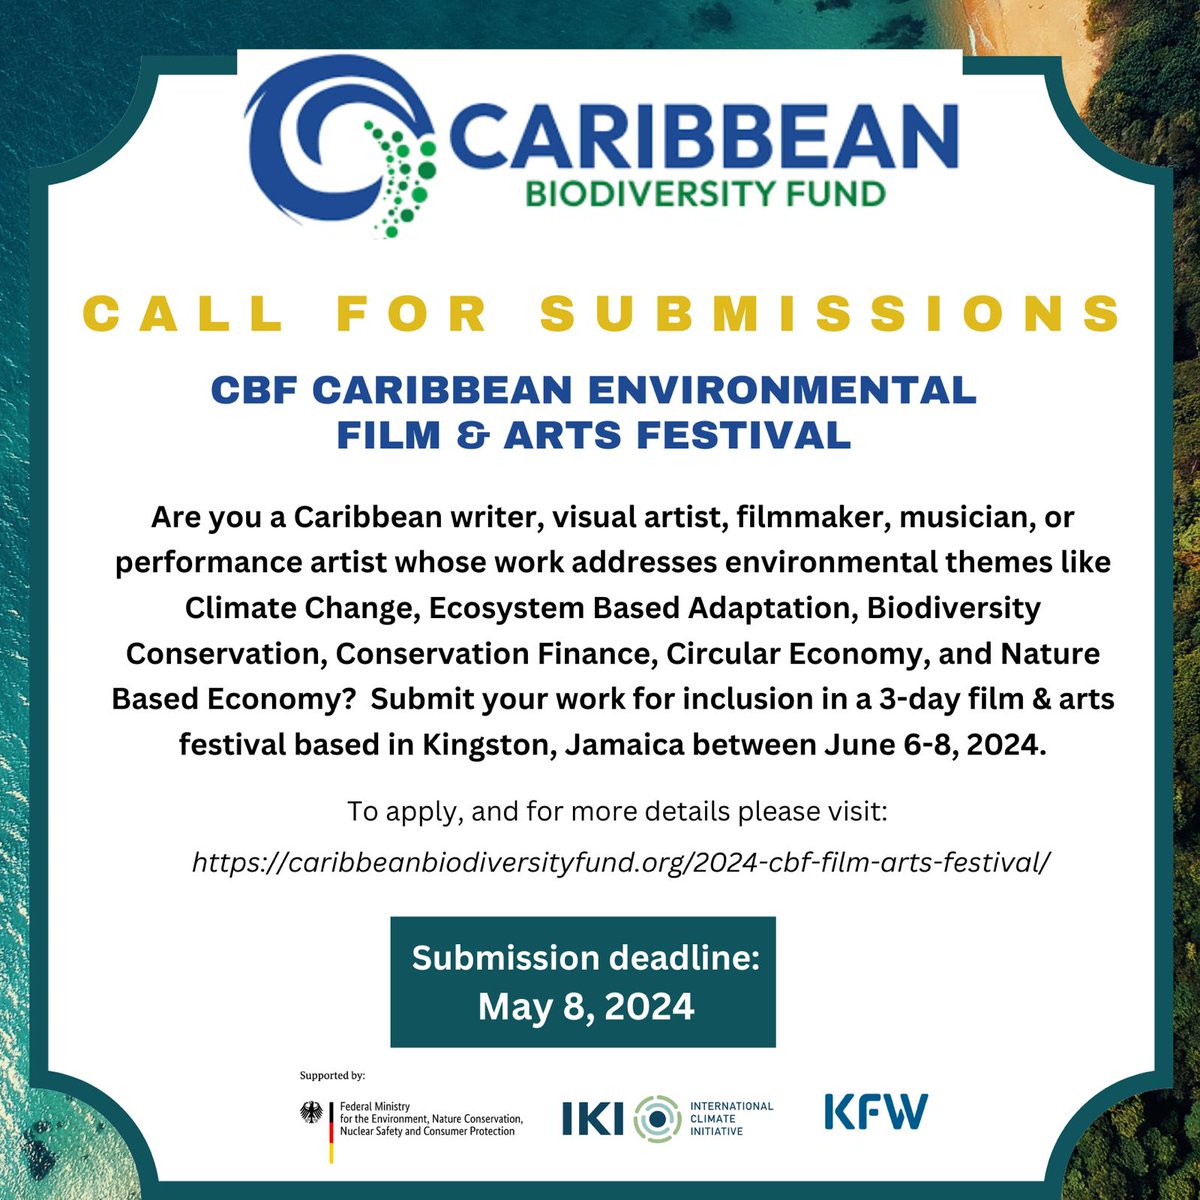 Calling all Caribbean artists! Are you passionate about environmental conservation? Submit your work to be featured in the upcoming CBF Caribbean Environmental Film & Arts Festival by Wednesday, May 8, 2024. 🗓️ June 6 - 8, 2024 📍Kingston, Jamaica ➡️ tinyurl.com/4brua87k